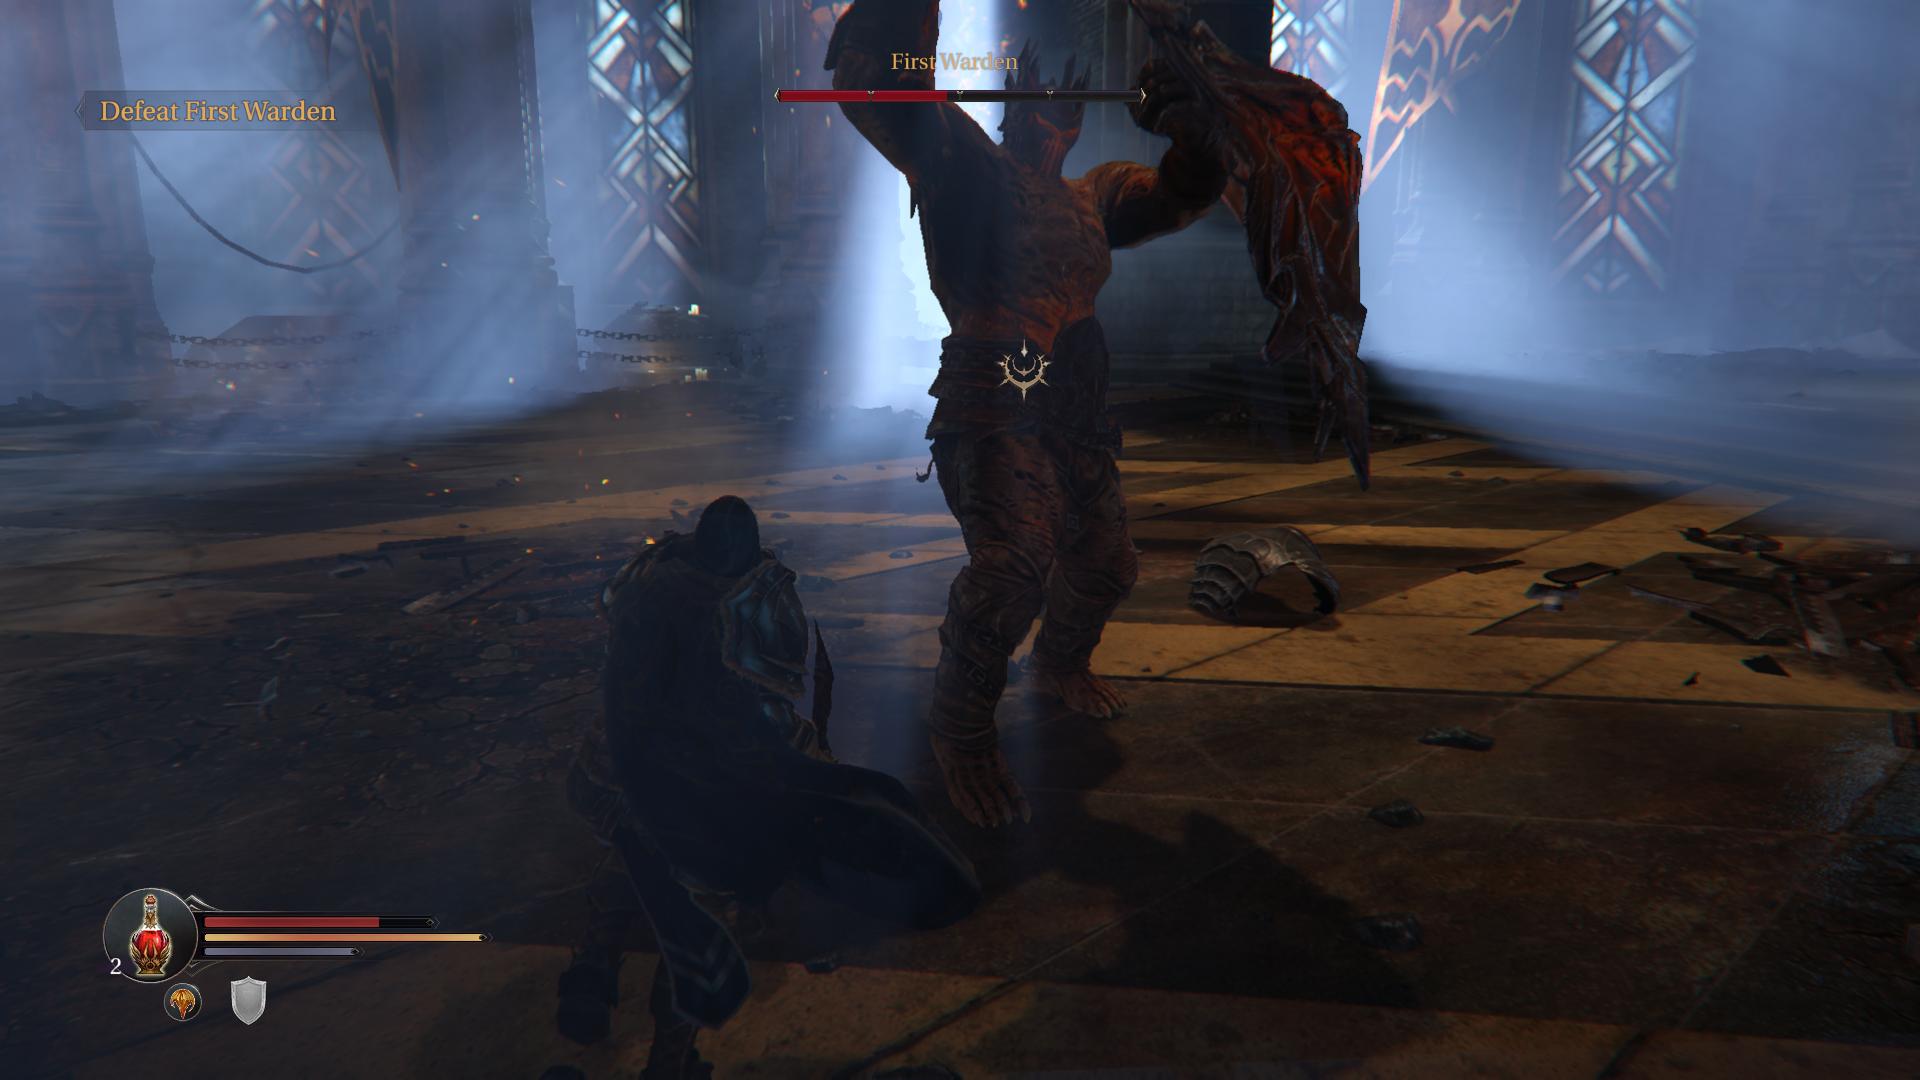 Extended 18-Minute Lords Of The Fallen Gameplay Trailer Shows Dark Hack And  Slash Action